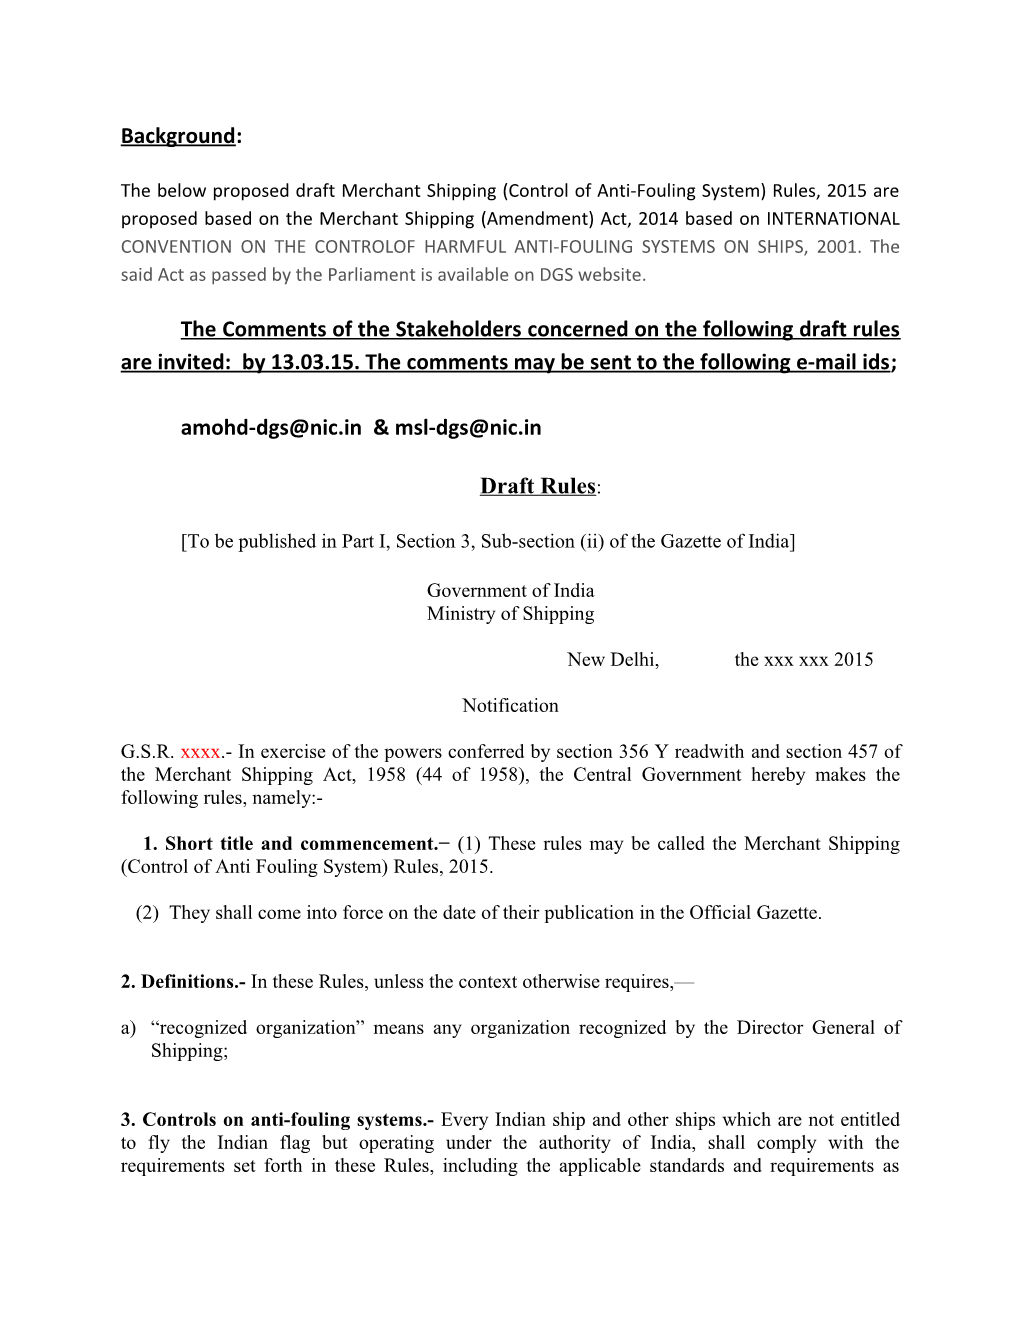 To Be Published in Part I, Section 3, Sub-Section (Ii) of the Gazette of India